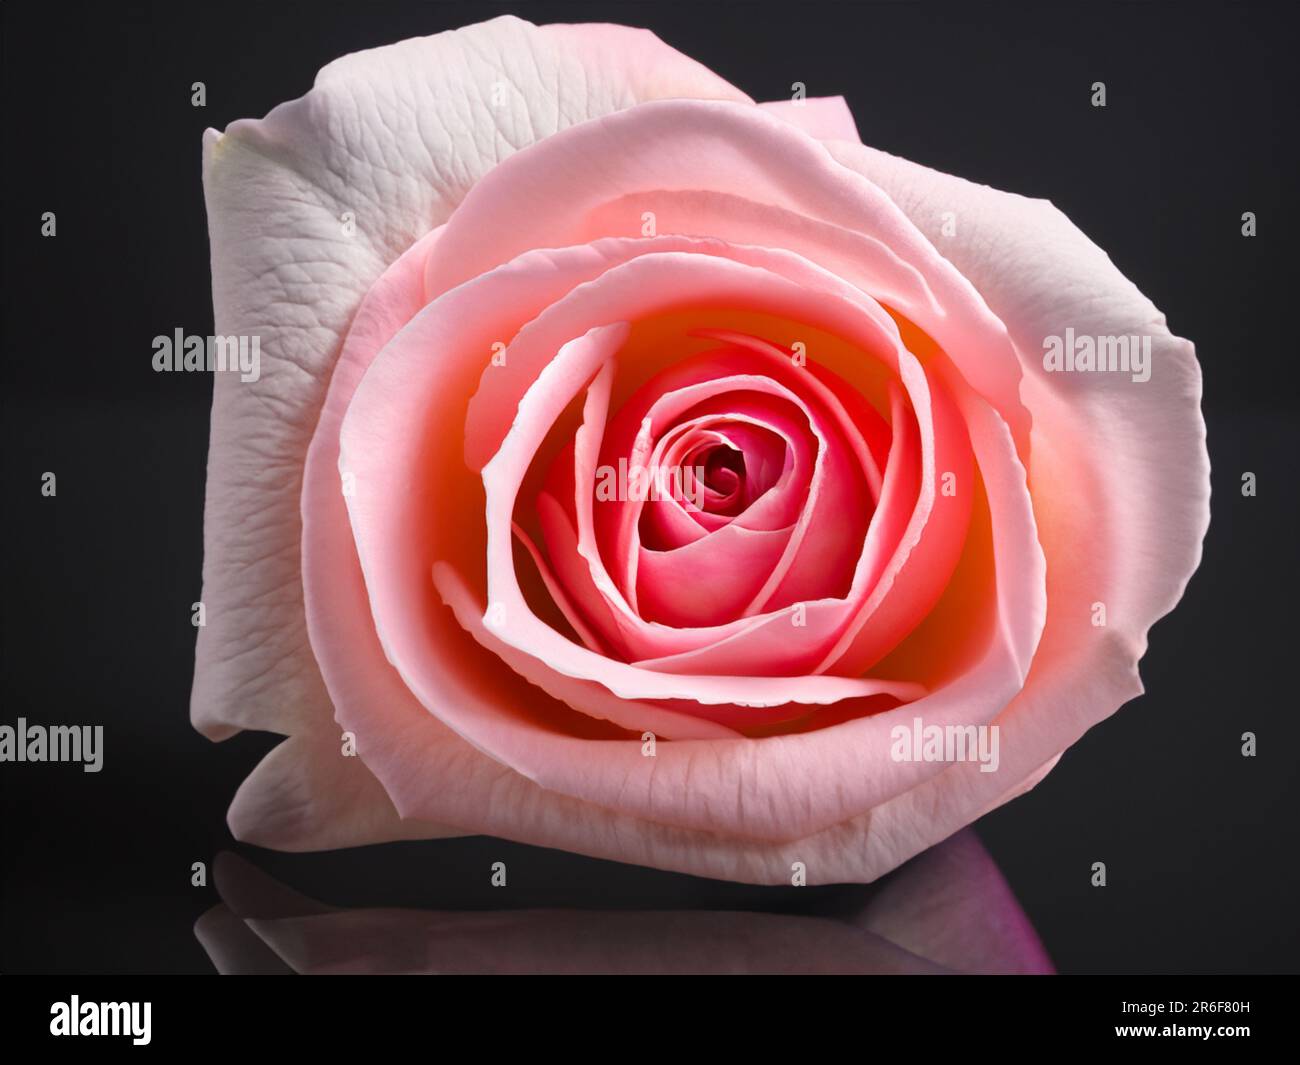 a pink rose is shown on a reflective surface with a black background. . Stock Photo